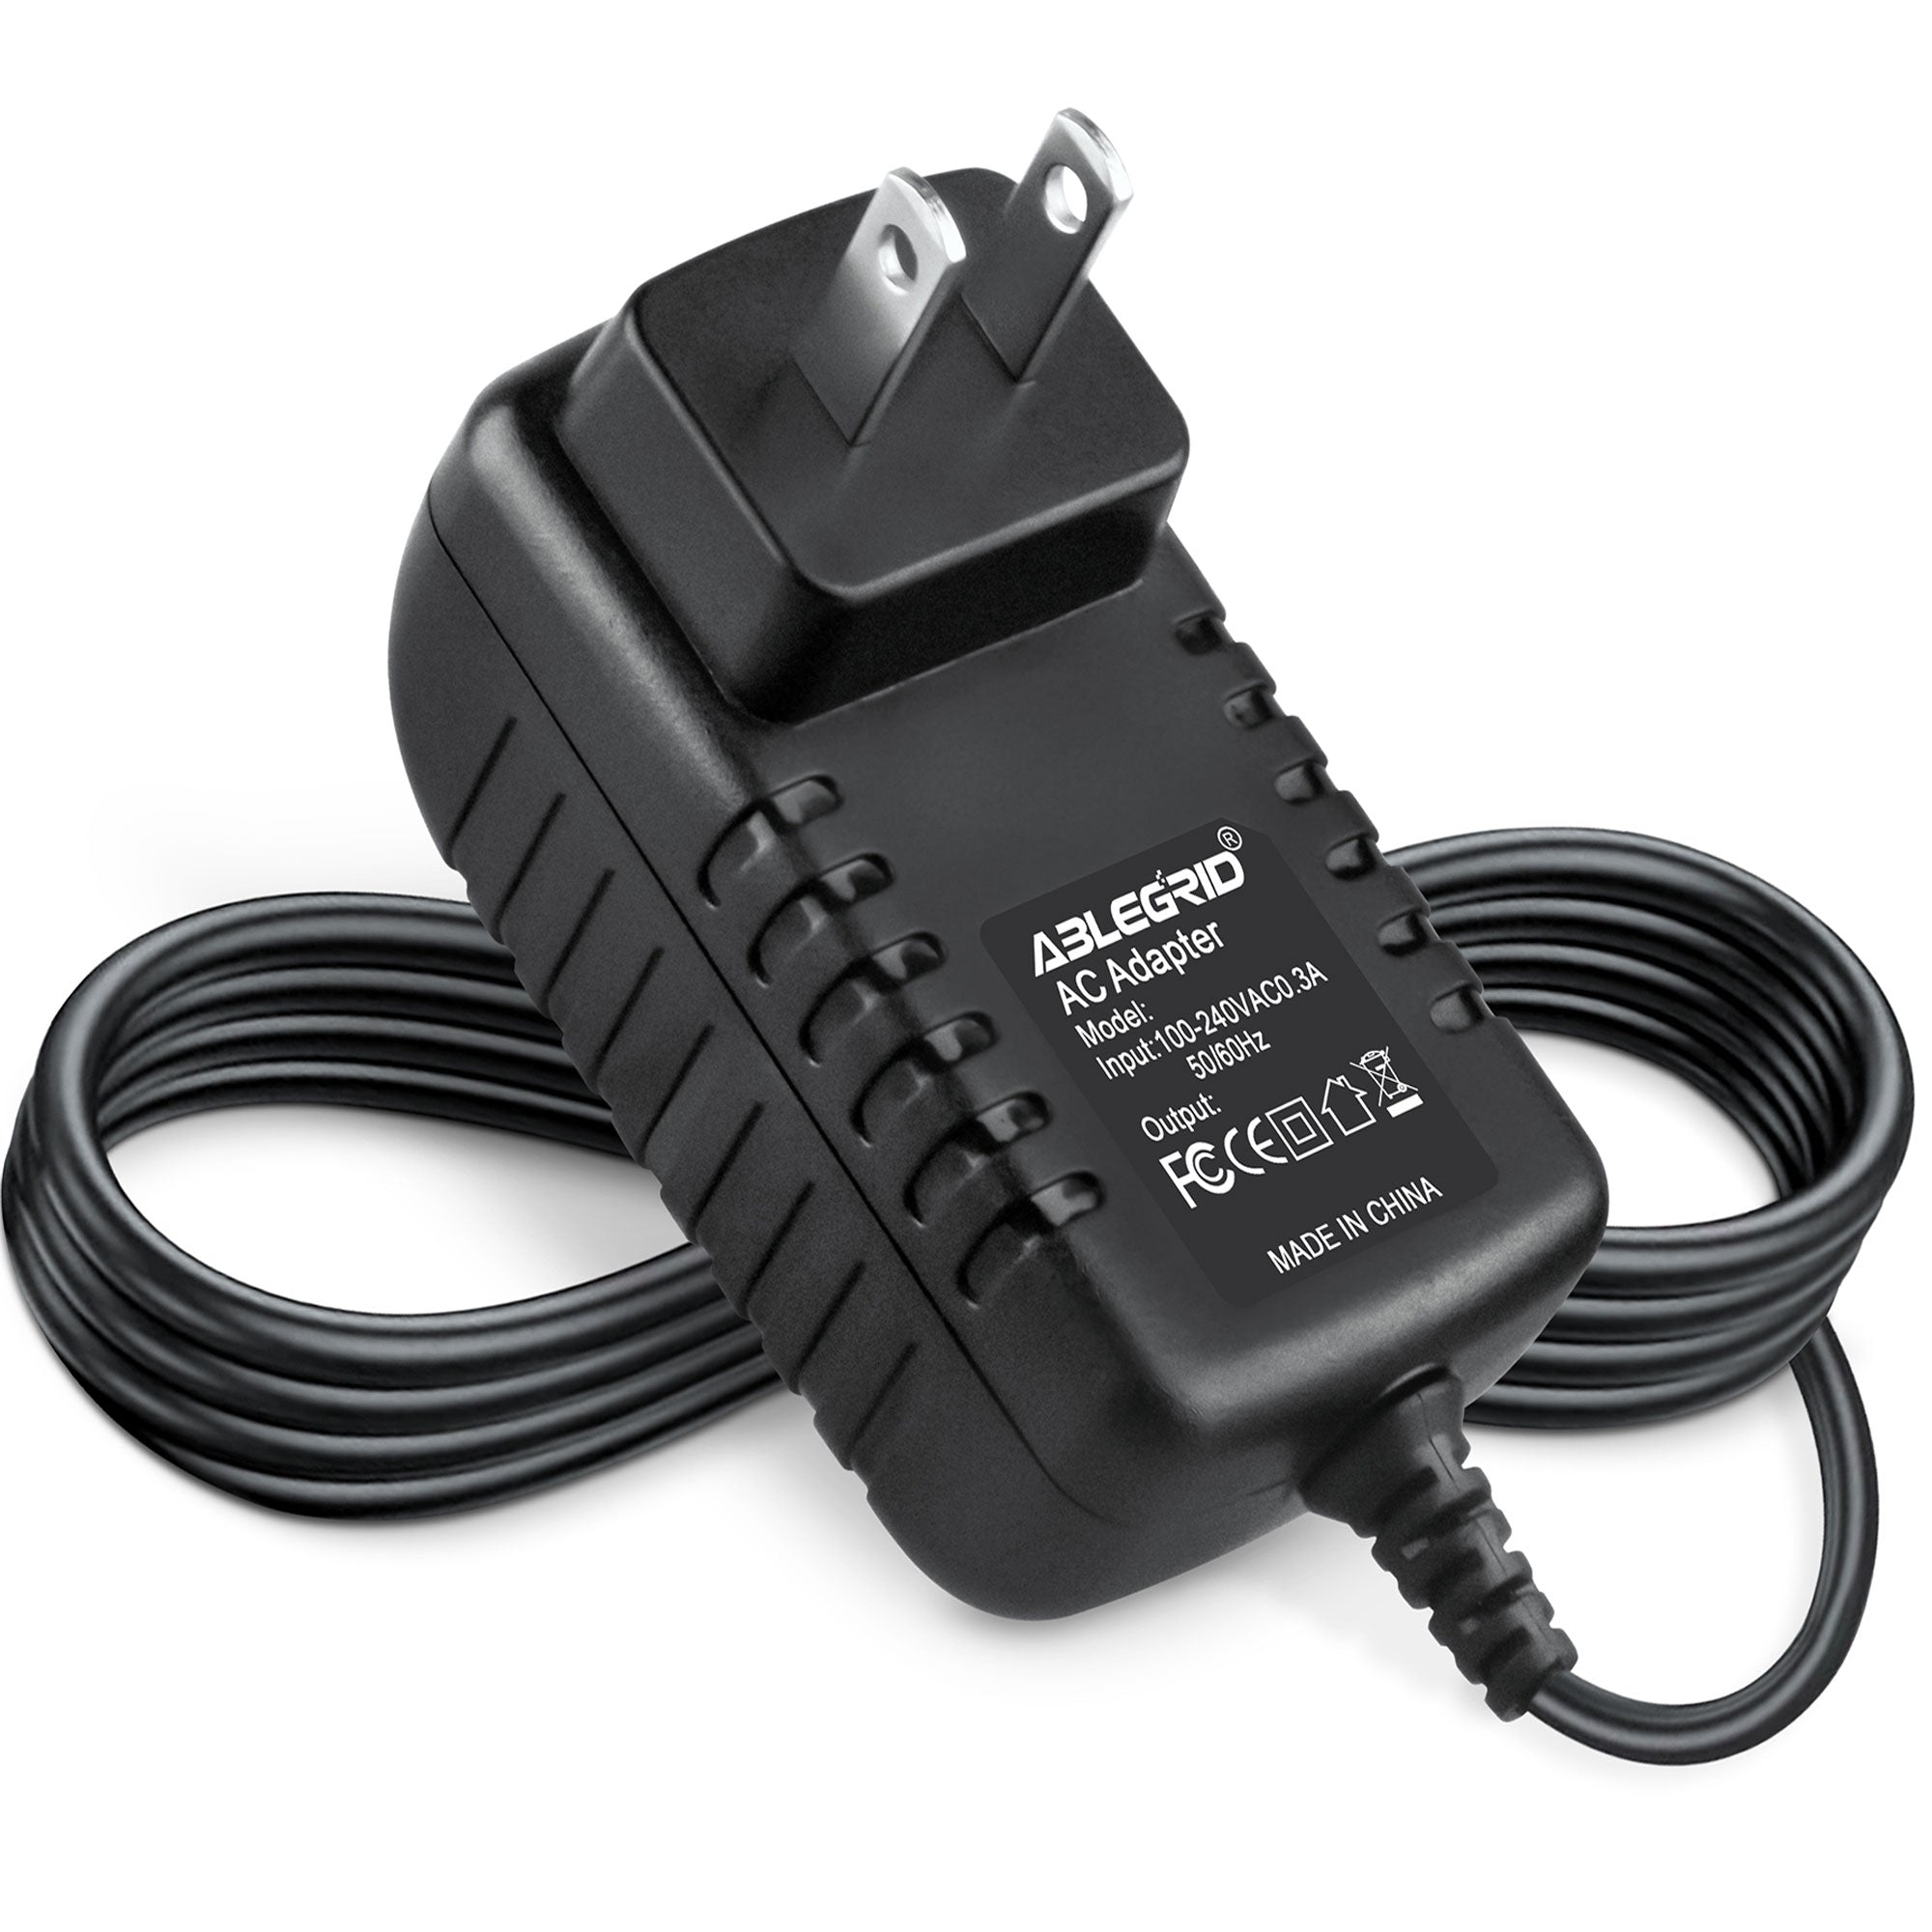 AbleGrid AC-DC Adapter for HP Hewlett Packard DreamScreen Model: KPC-24F (REV:A) Part Number: 530395-001 530395001 Power Supply Cord Cable PS Wall Home Charger Input: 100V - 120V AC - 240 VAC 50/60Hz Worldwide Voltage Use Mains PSU